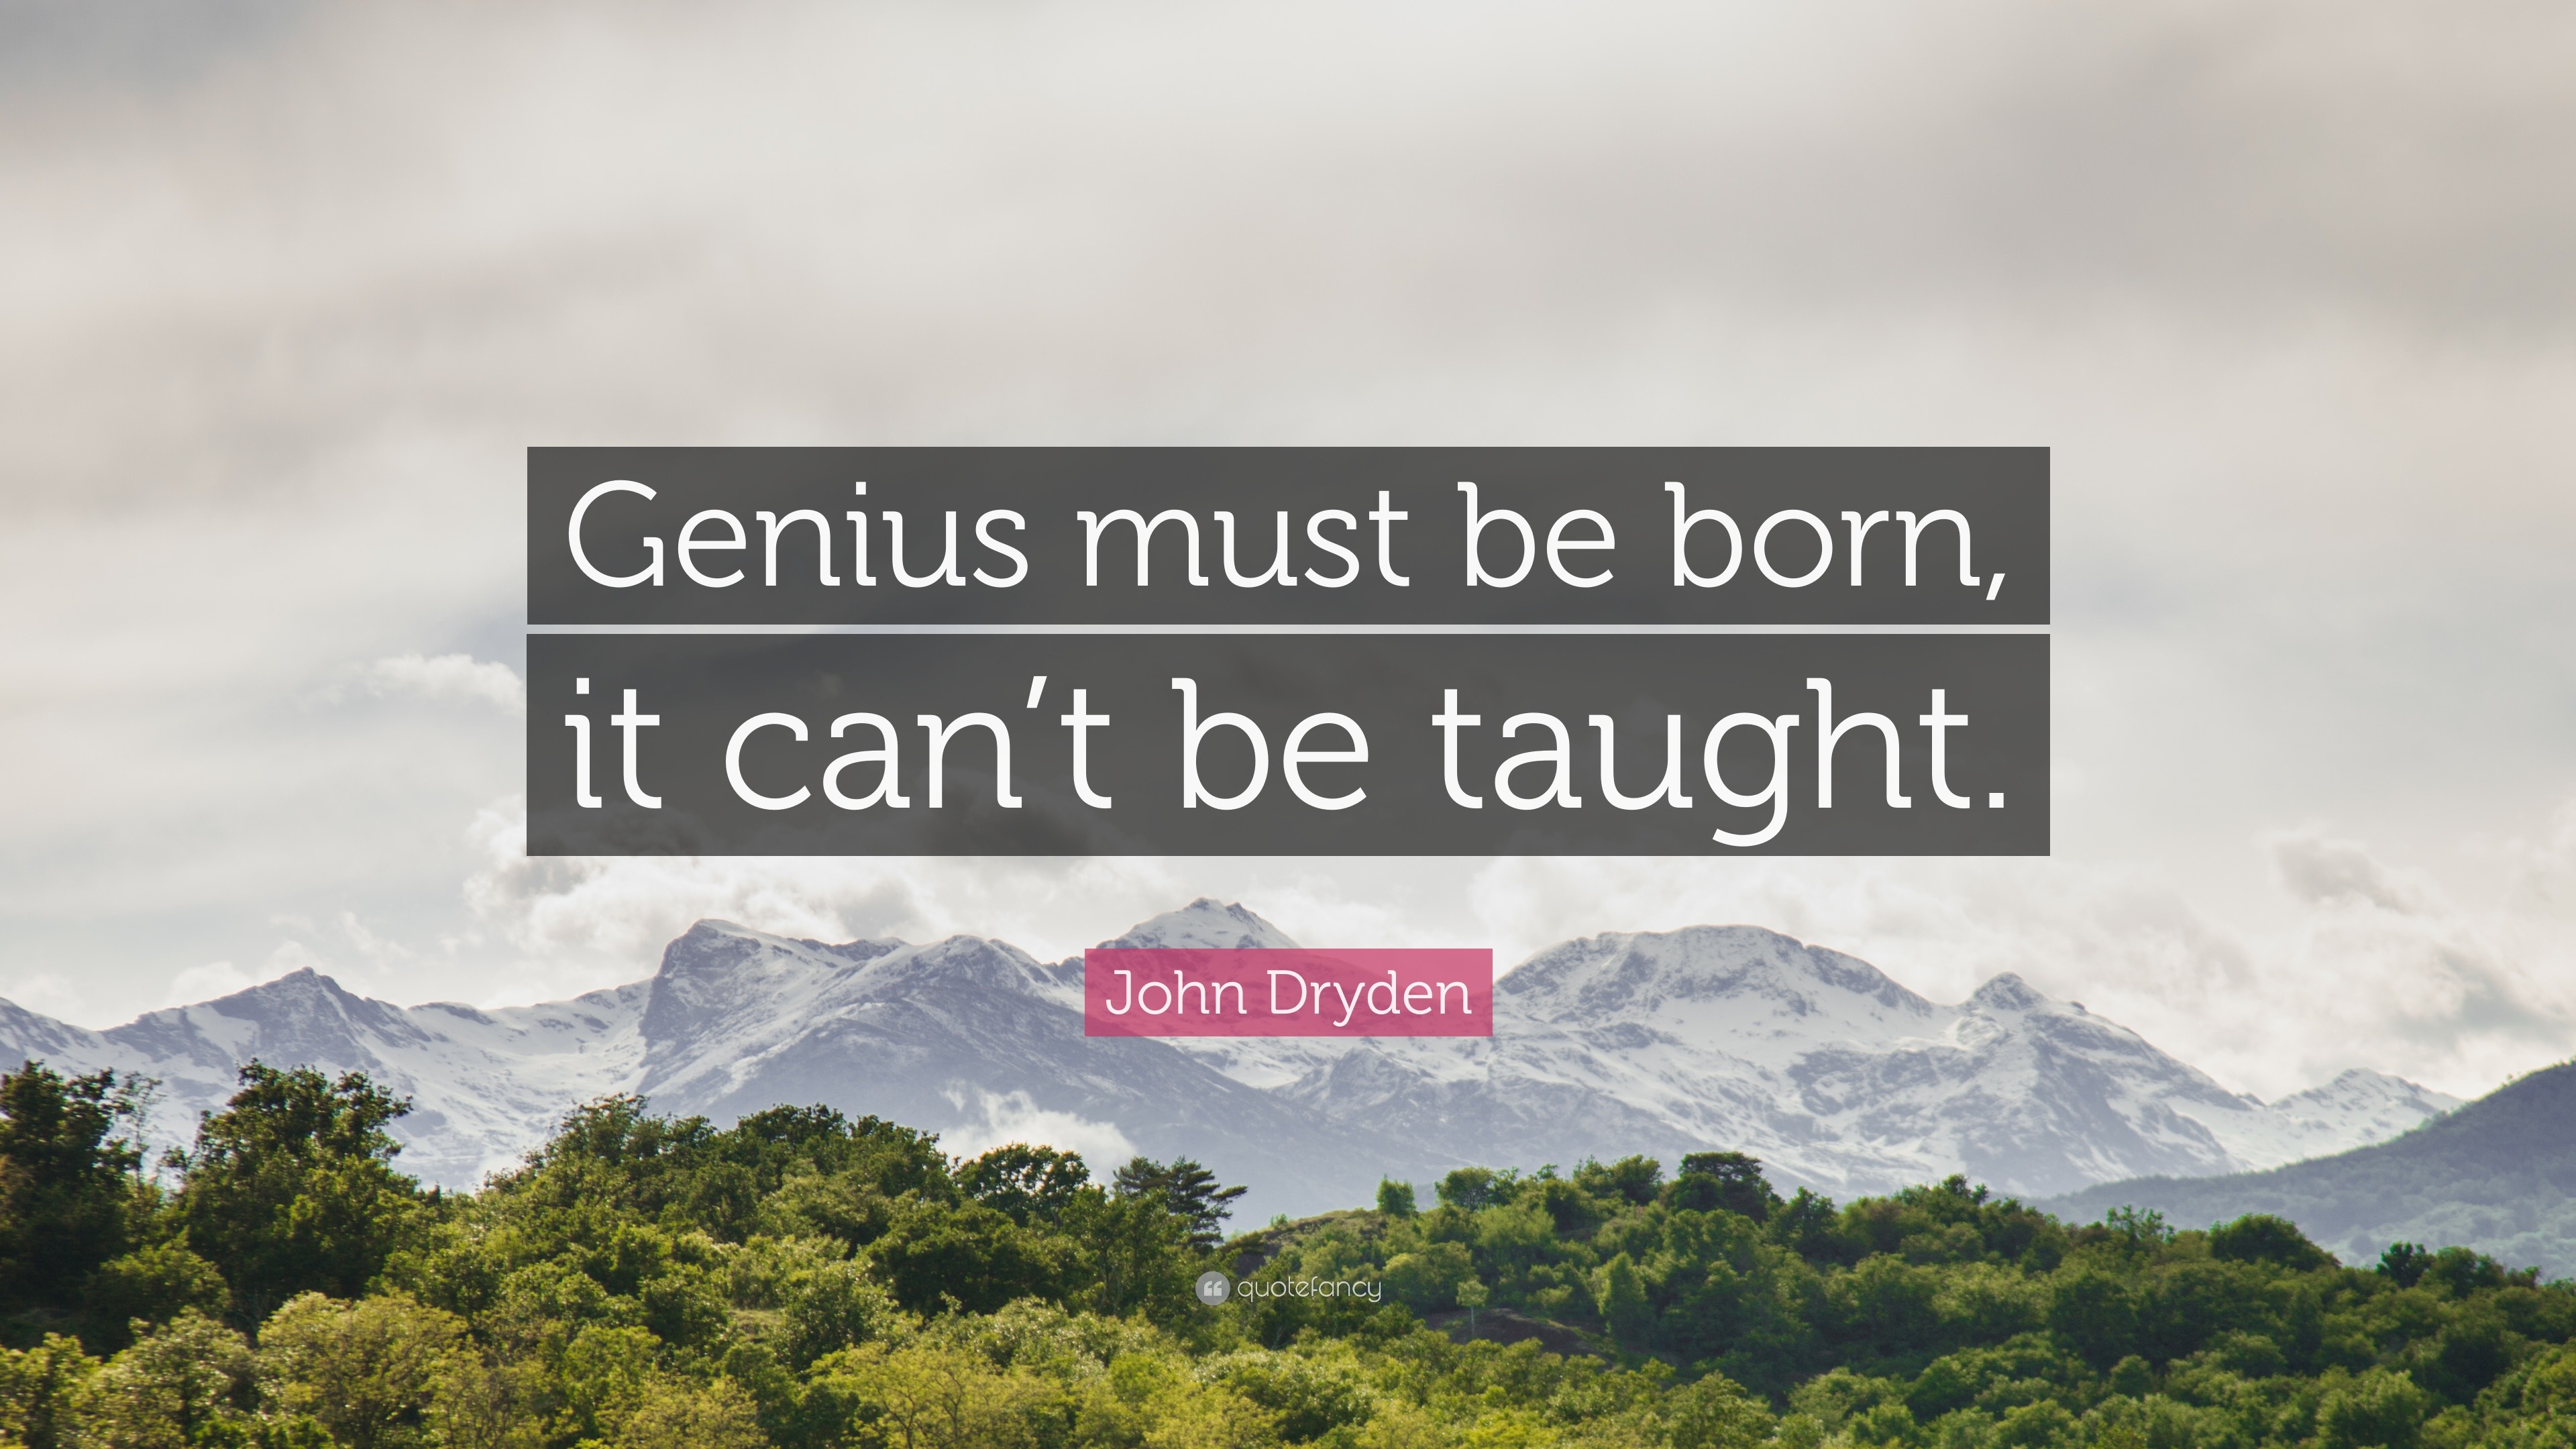 John Dryden Quote: “Genius must be born, it can't be taught.”